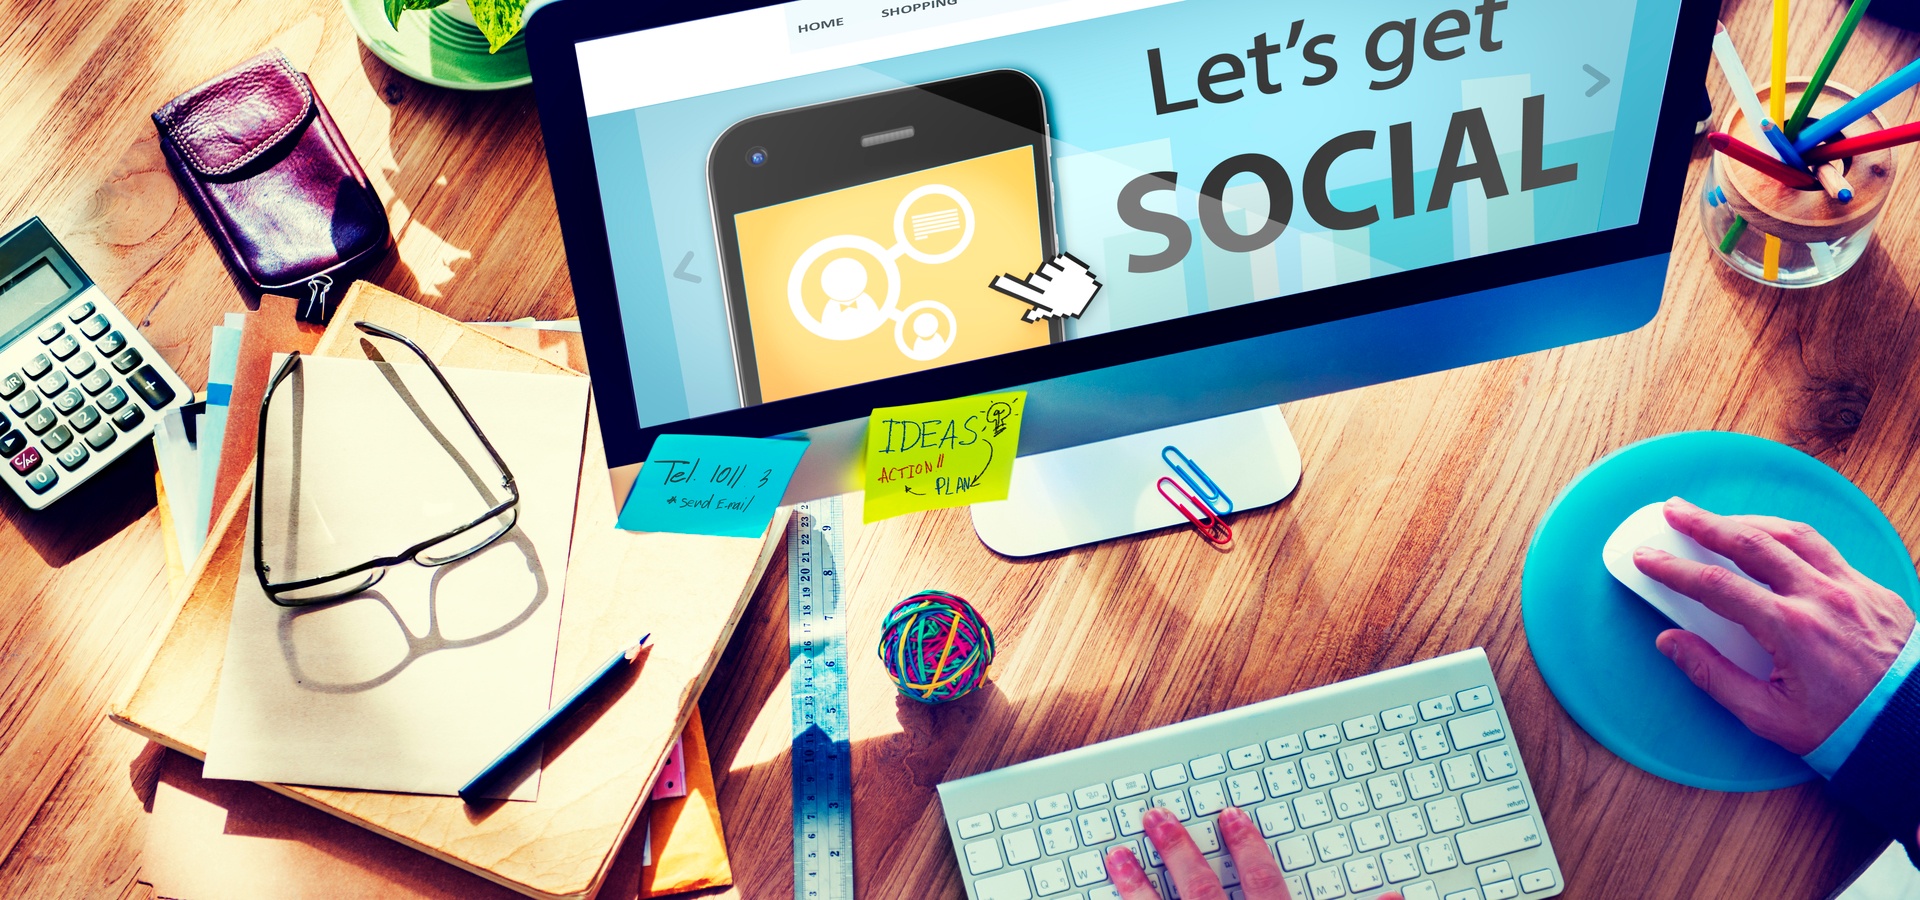 "Let's get Social" graphic displaying on computer screen